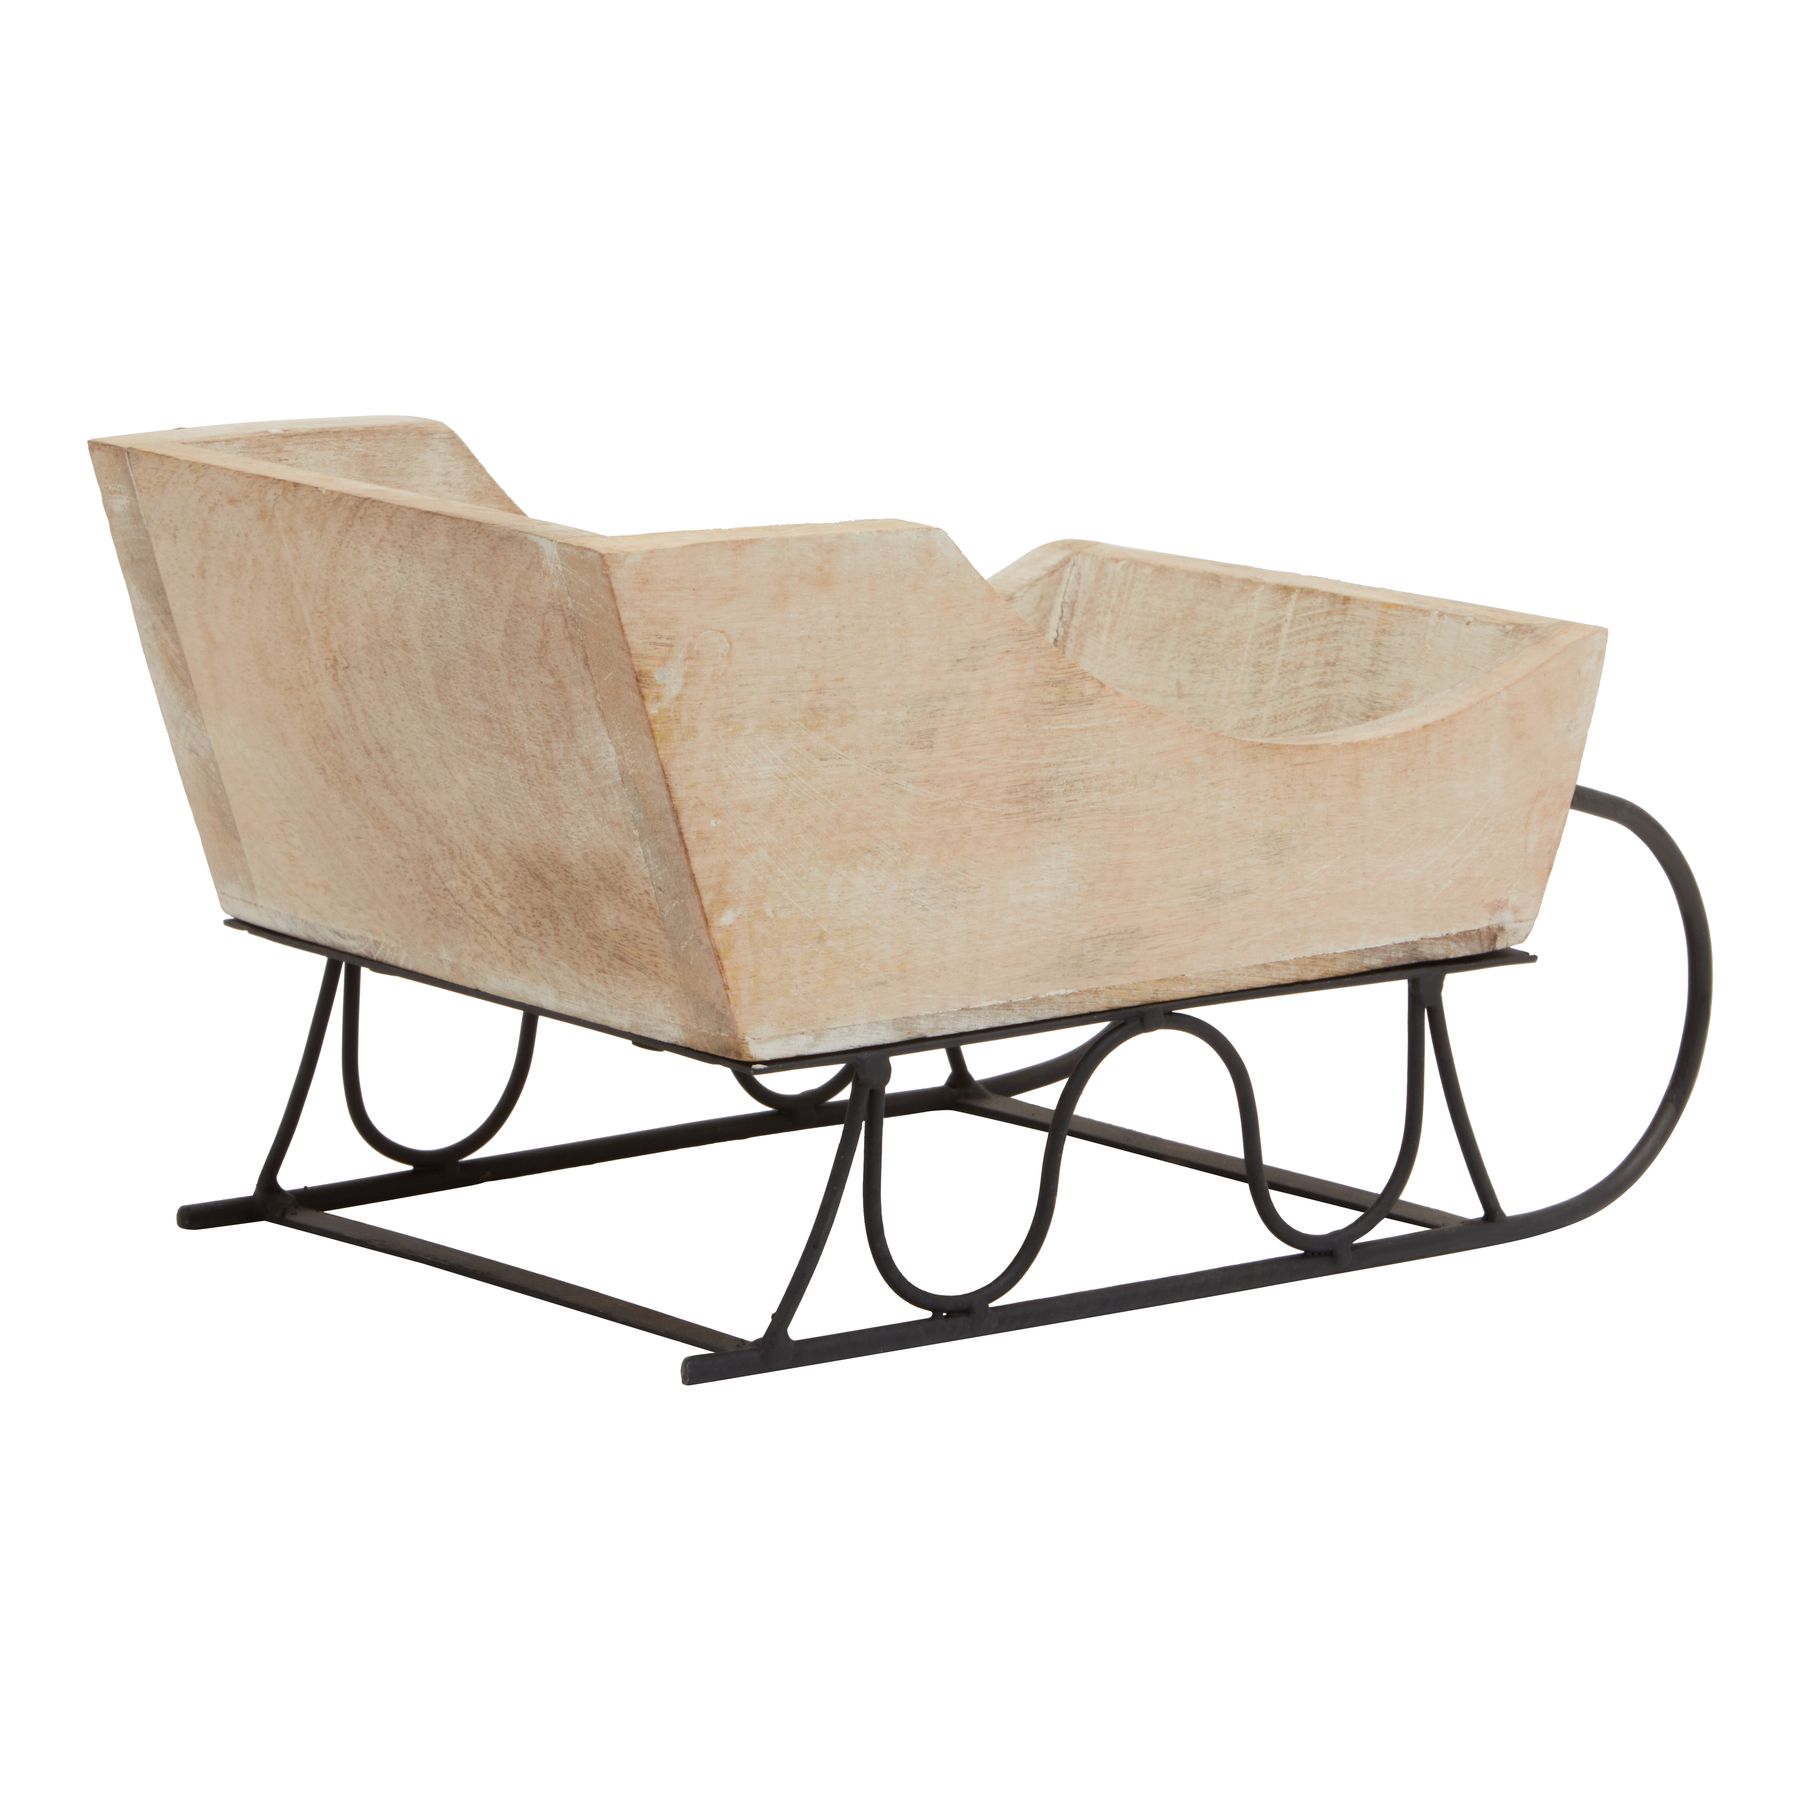 White Wash Collection Wooden Decorative Sleigh - Image 2